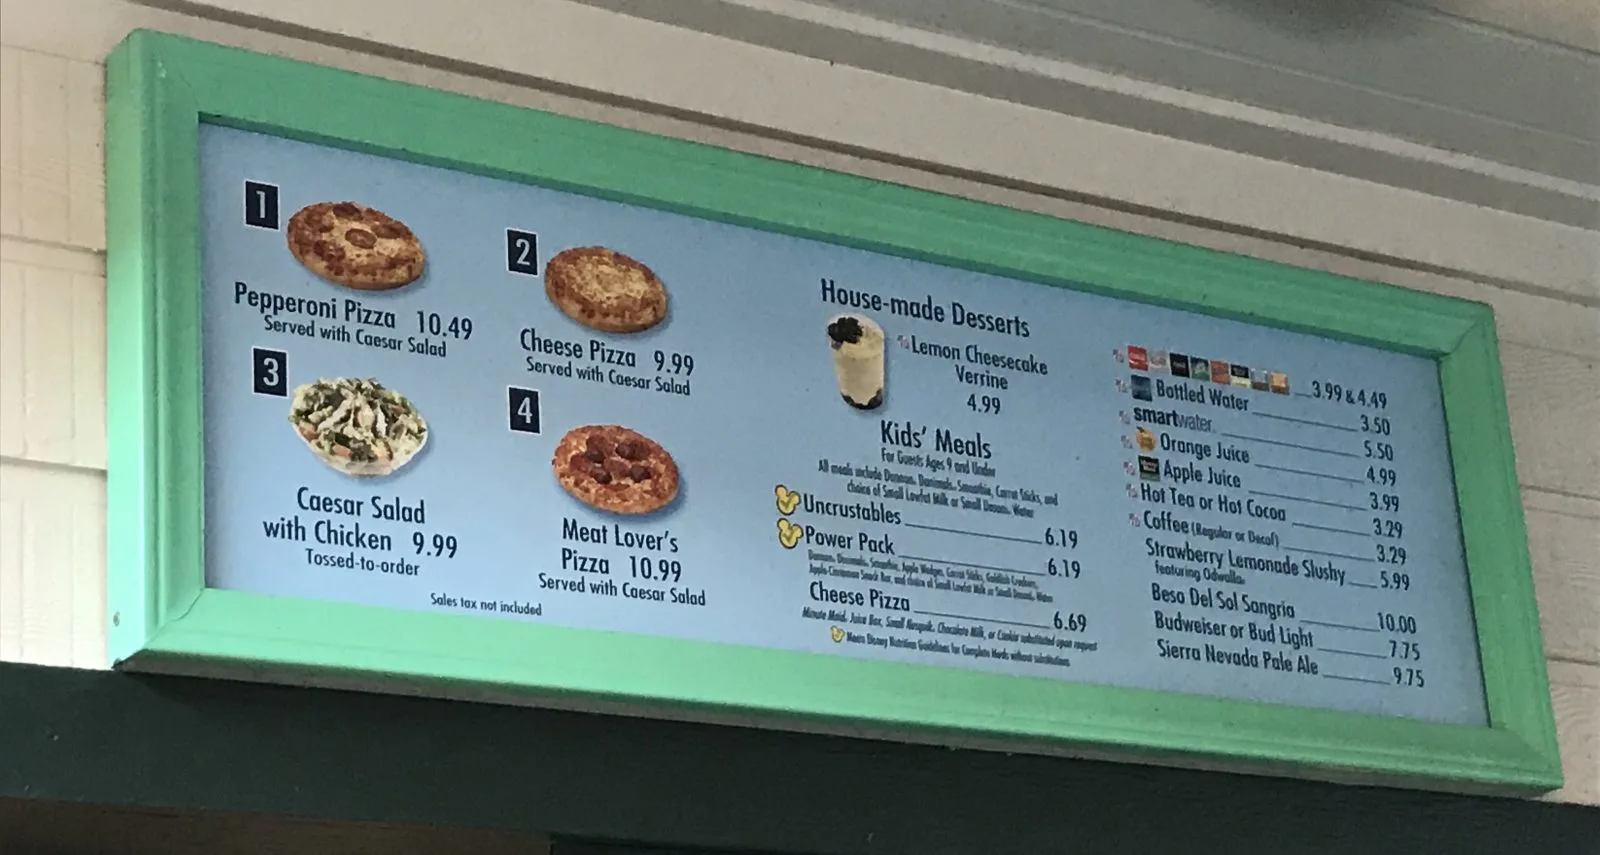 Cataline Eddie's menu sign with photos and pricing